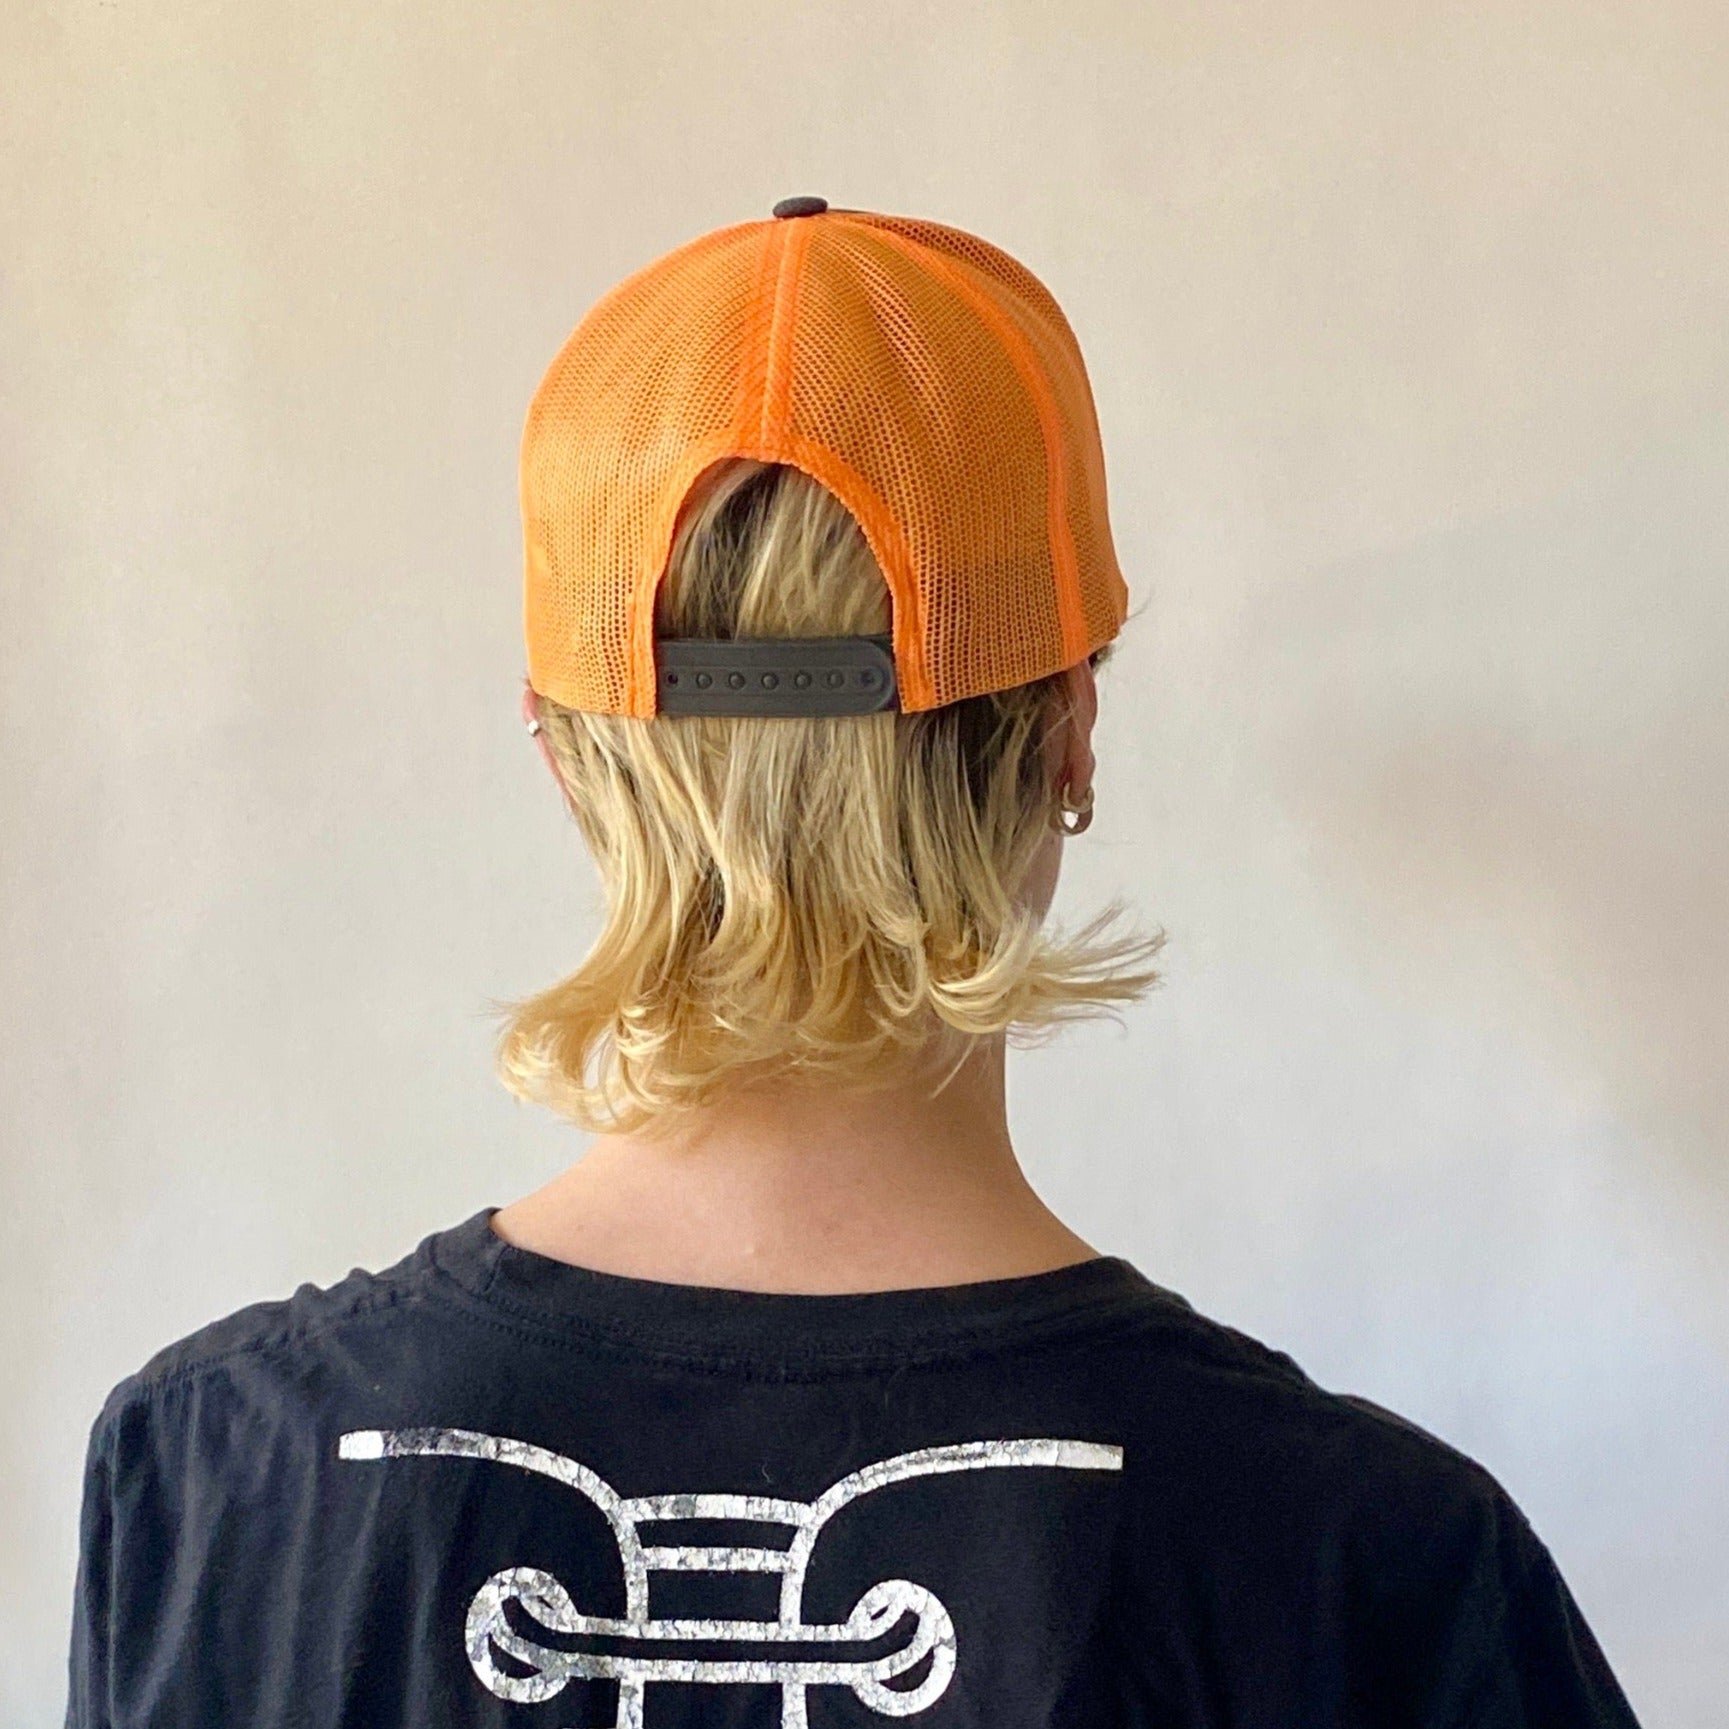 model facing away showing back of neon orange and stone gray trucker hat with adjustable snap back